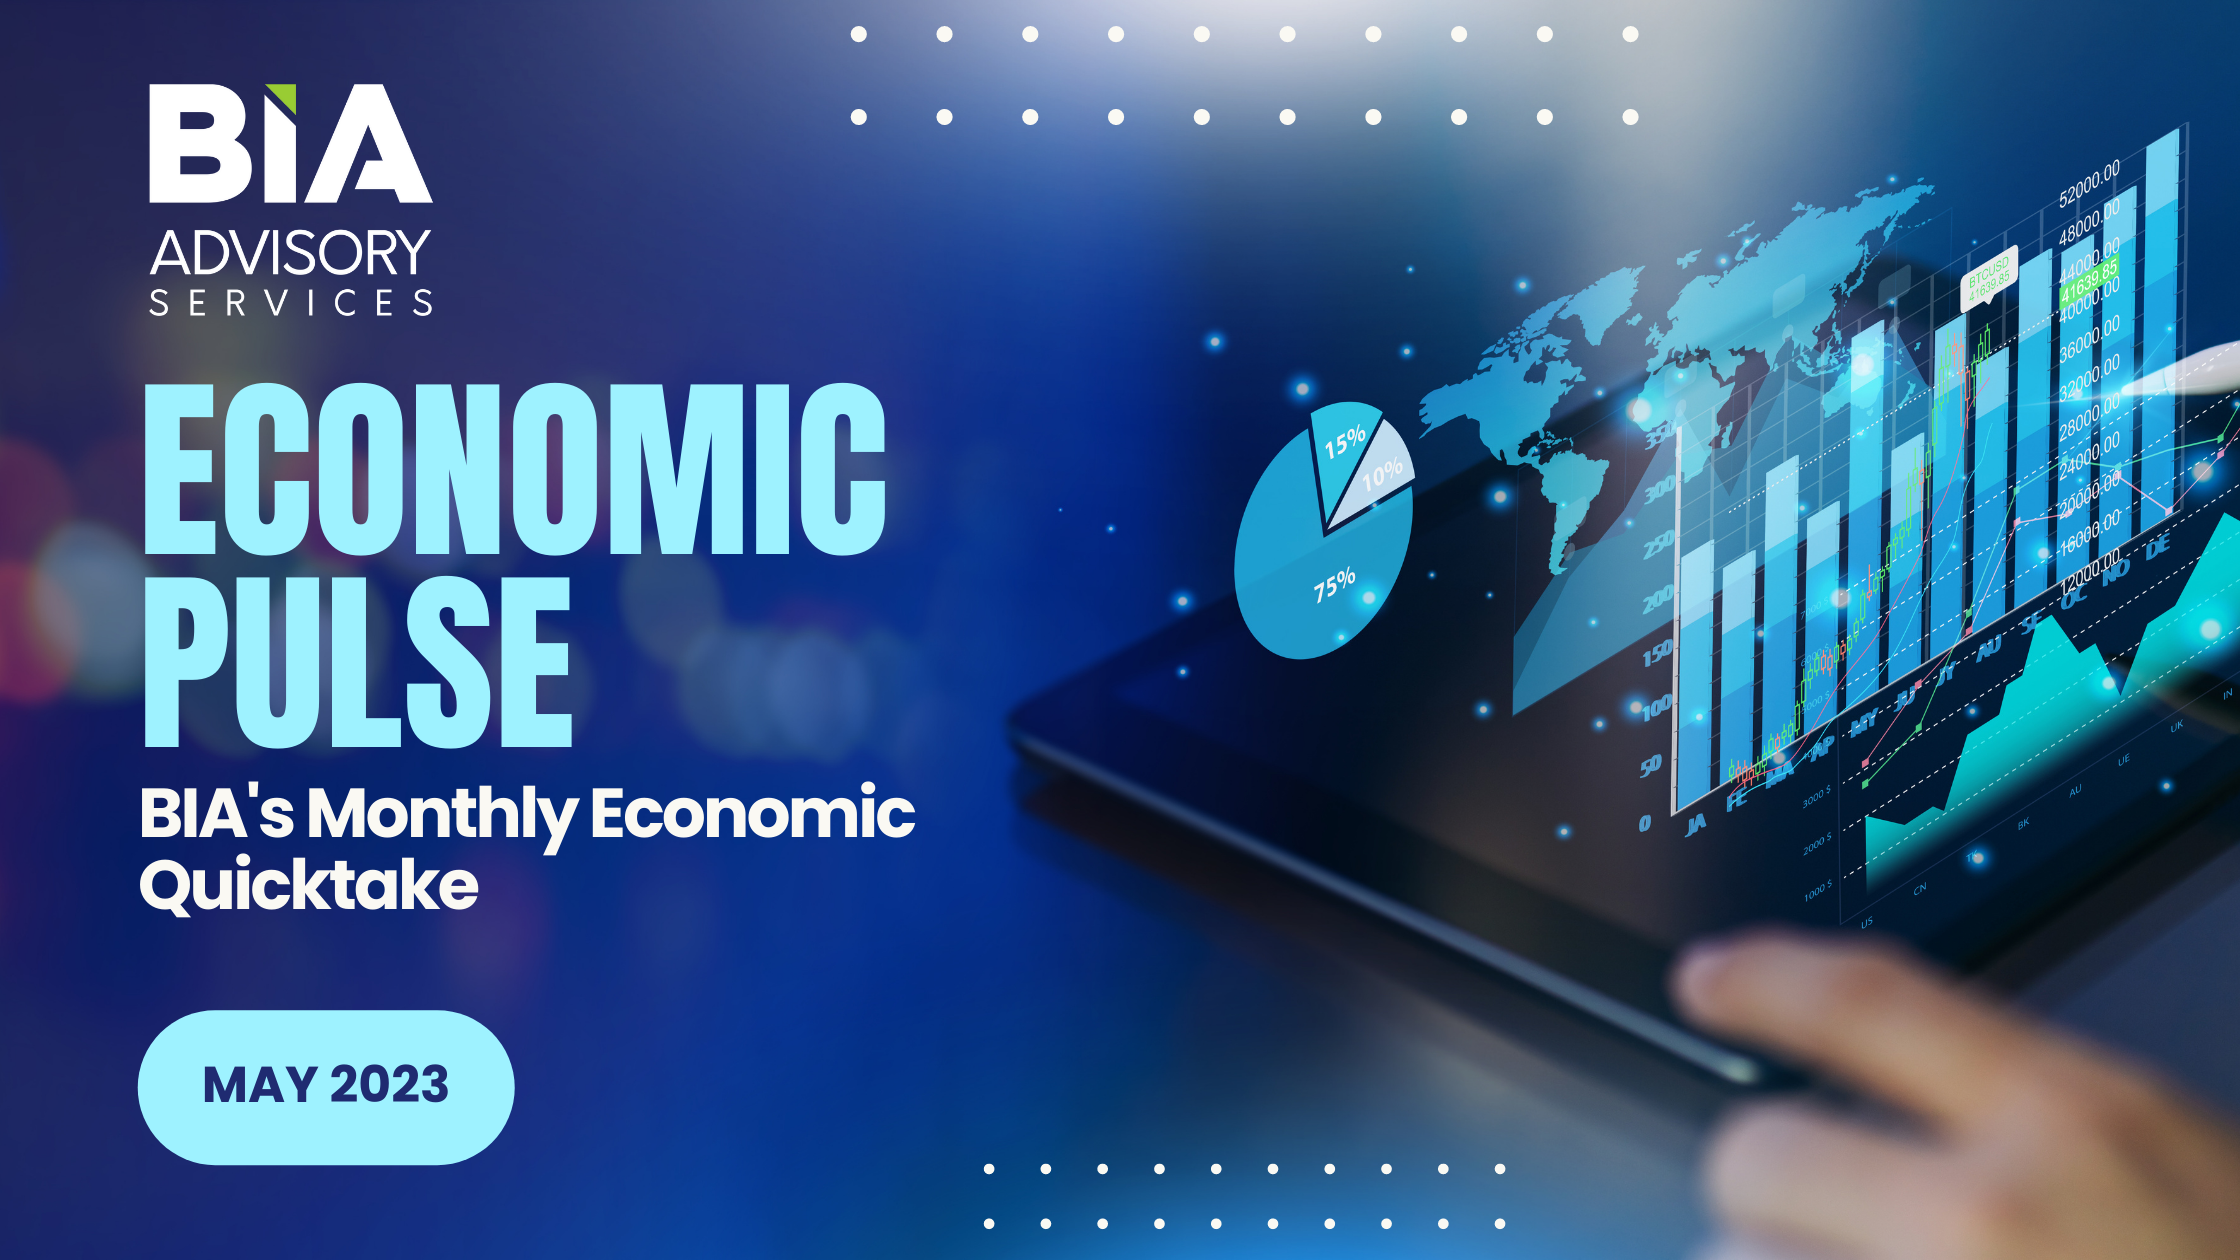 Economic Pulse: BIA’s Monthly Quick Take For May 2023